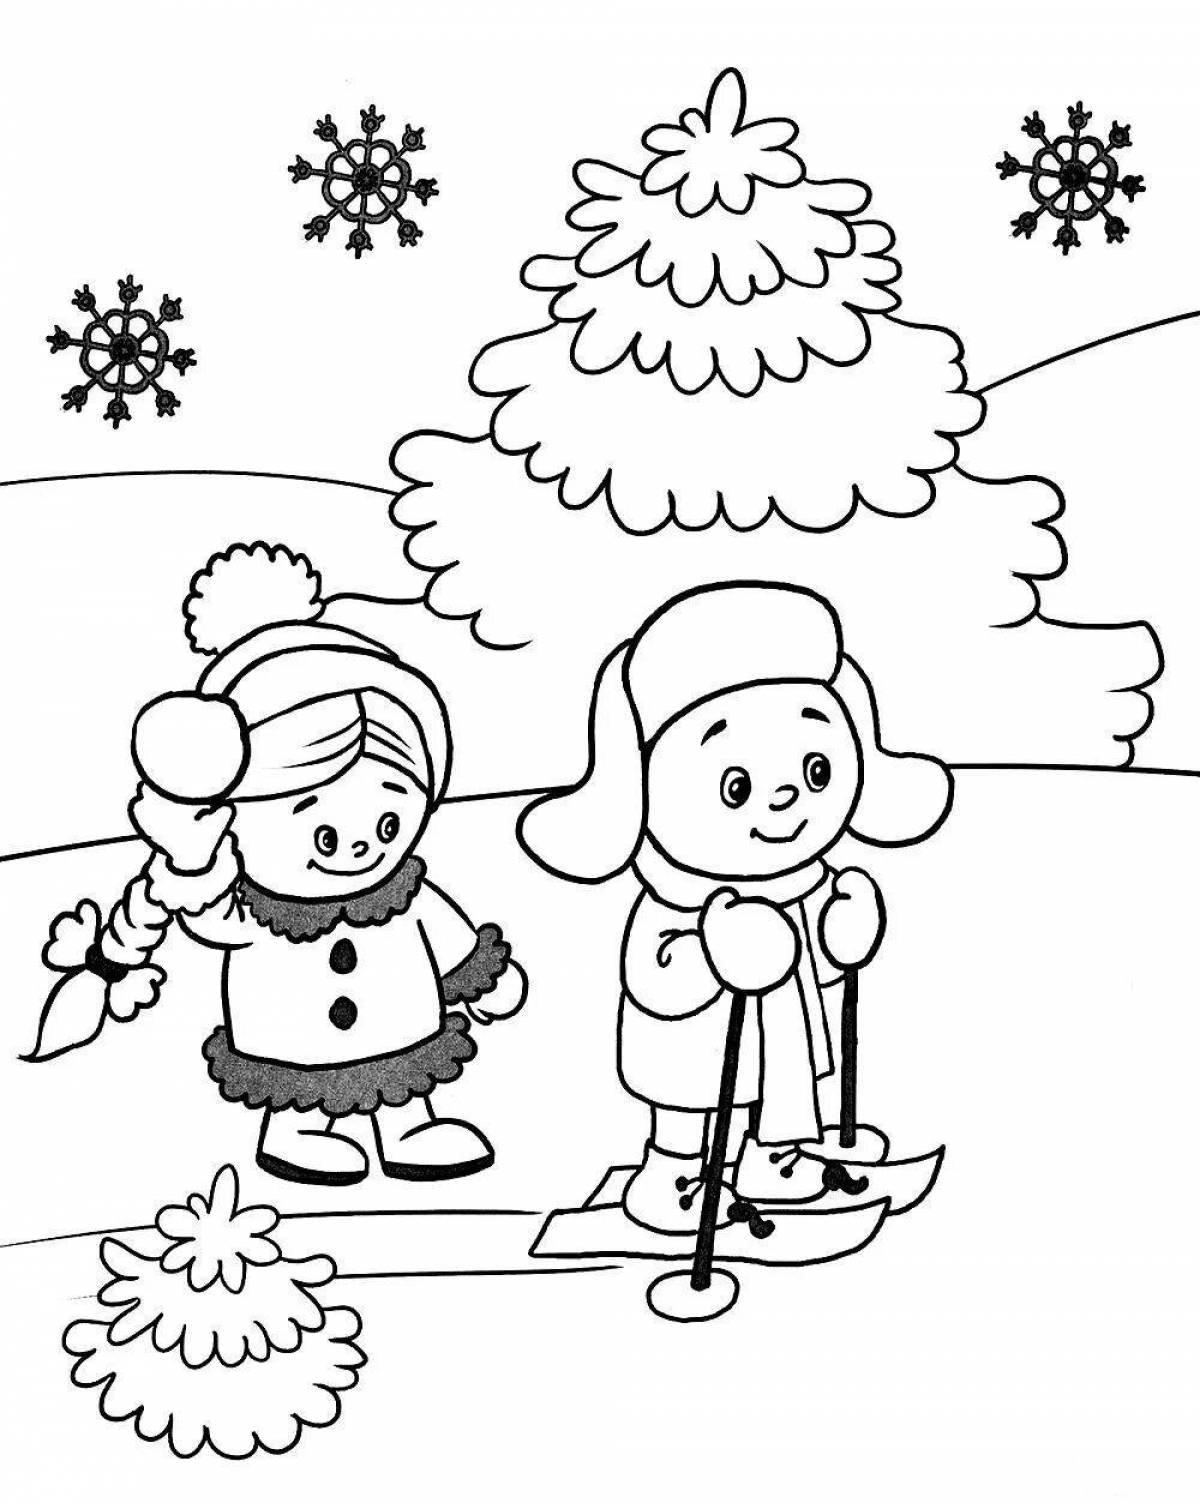 Coloured sparkling coloring winter fun for children 3-4 years old in kindergarten